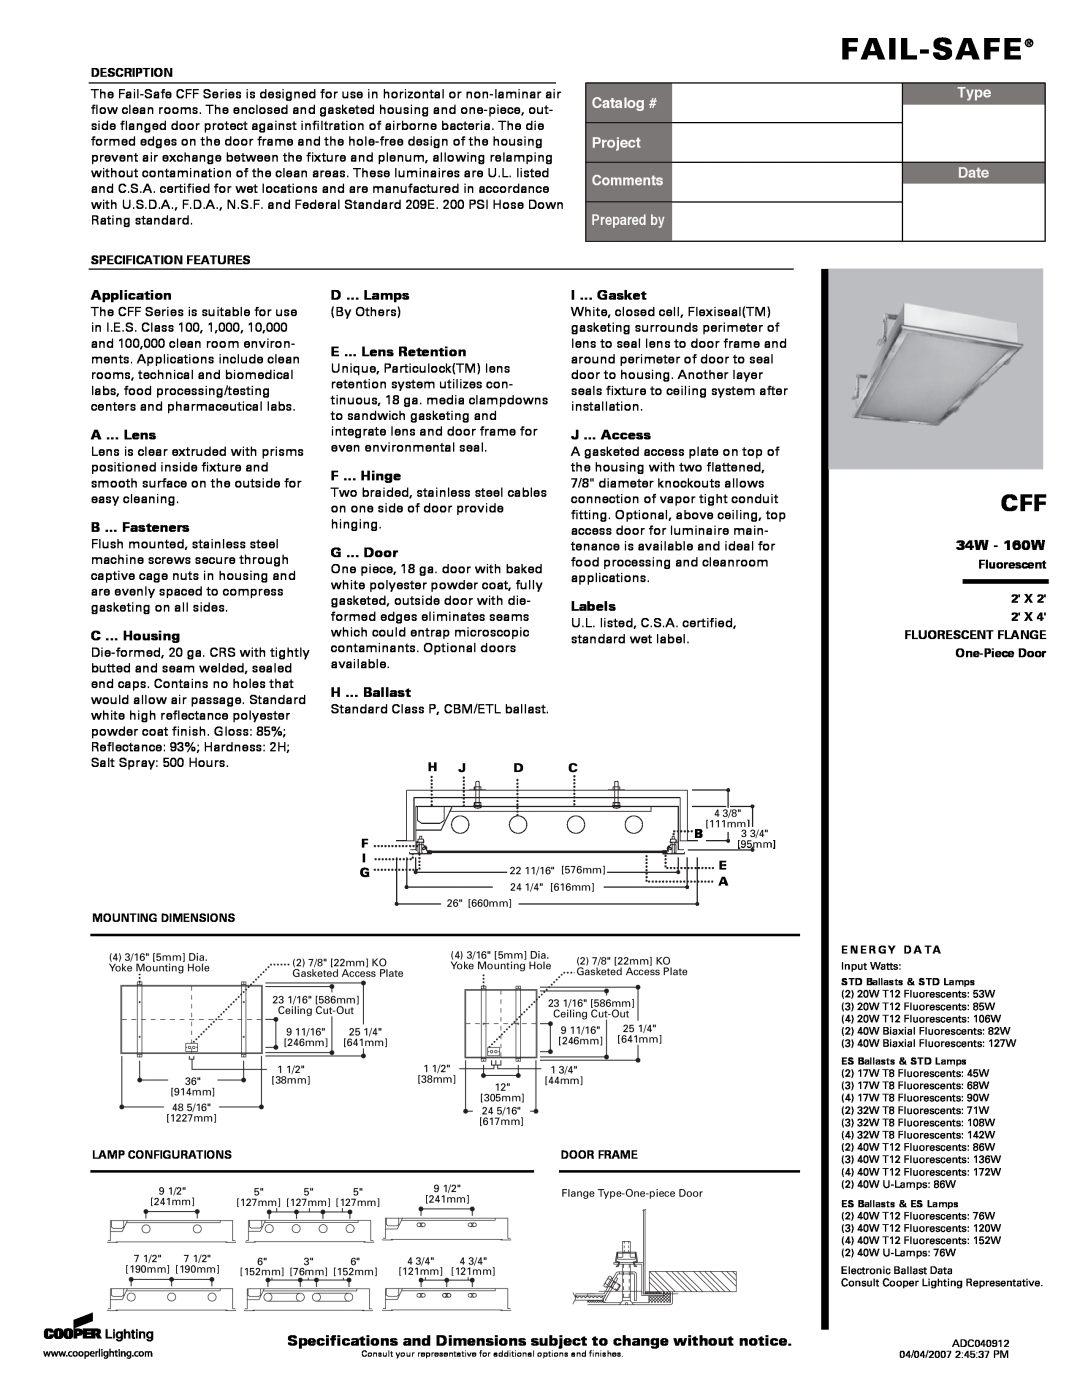 Cooper Lighting CFF specifications 34W - 160W, Fail-Safe, Catalog #, Project Comments, Prepared by, Type, Date 